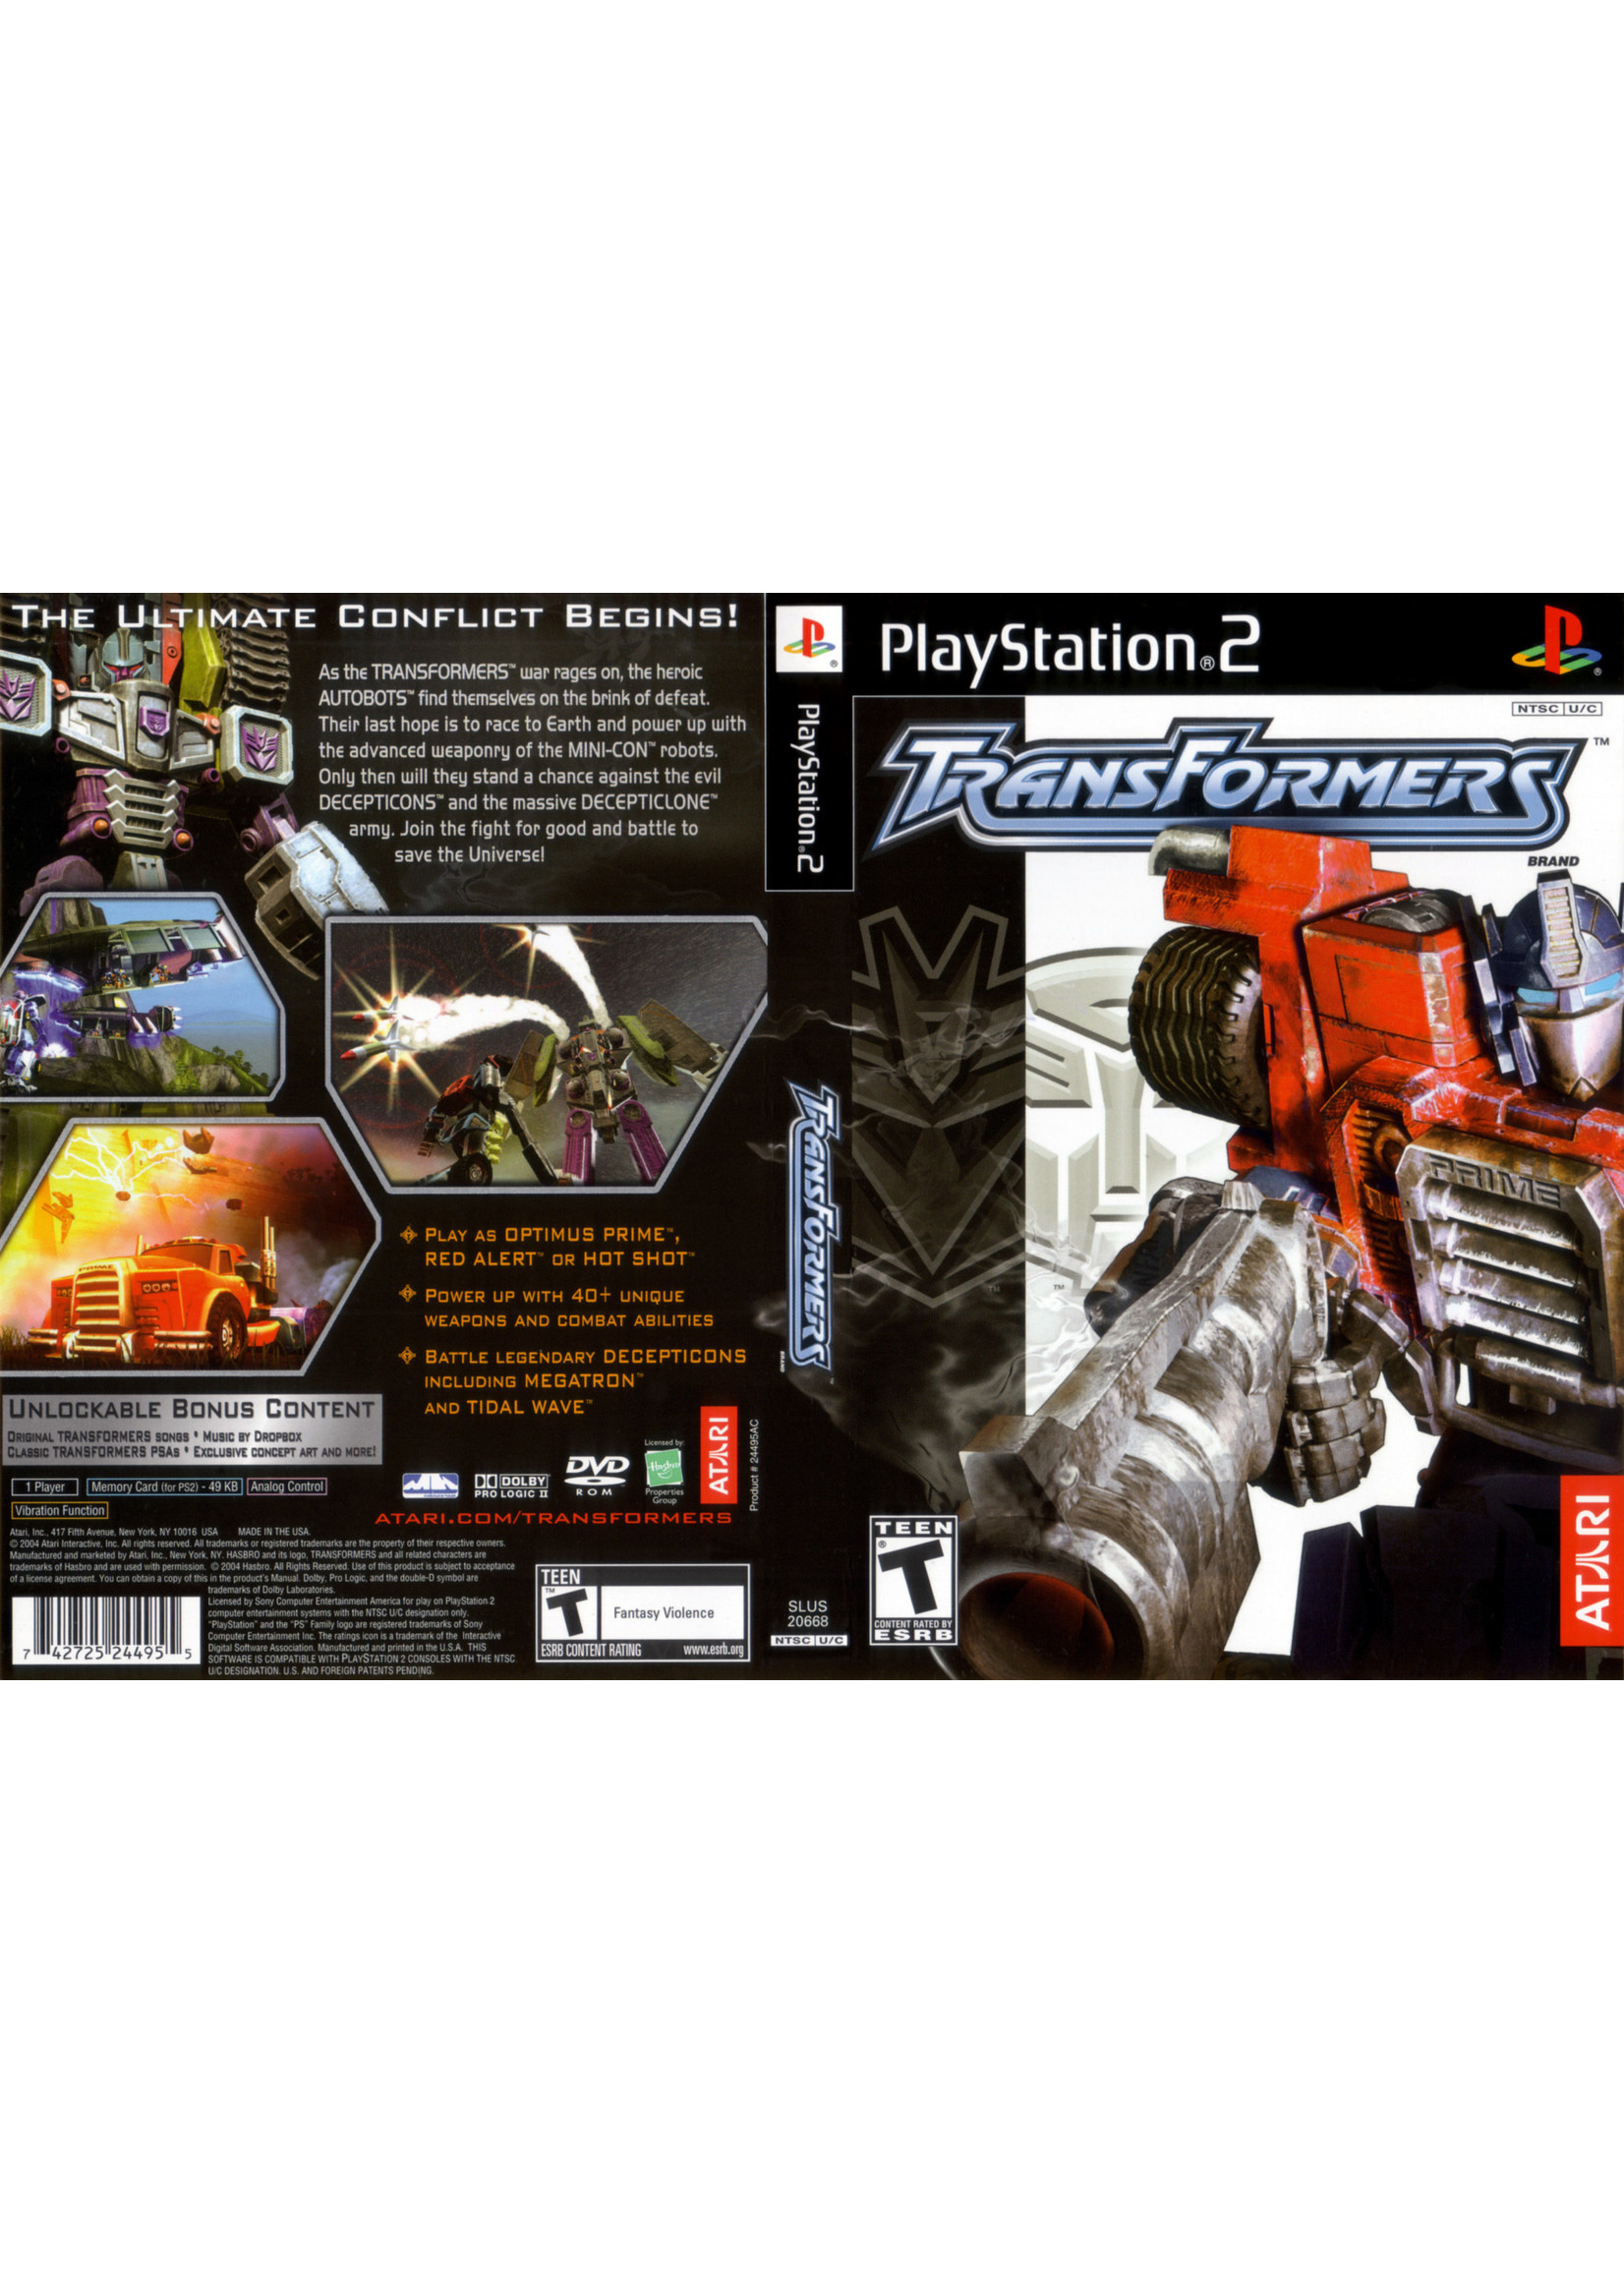 Sony Playstation 2 (PS2) Transformers